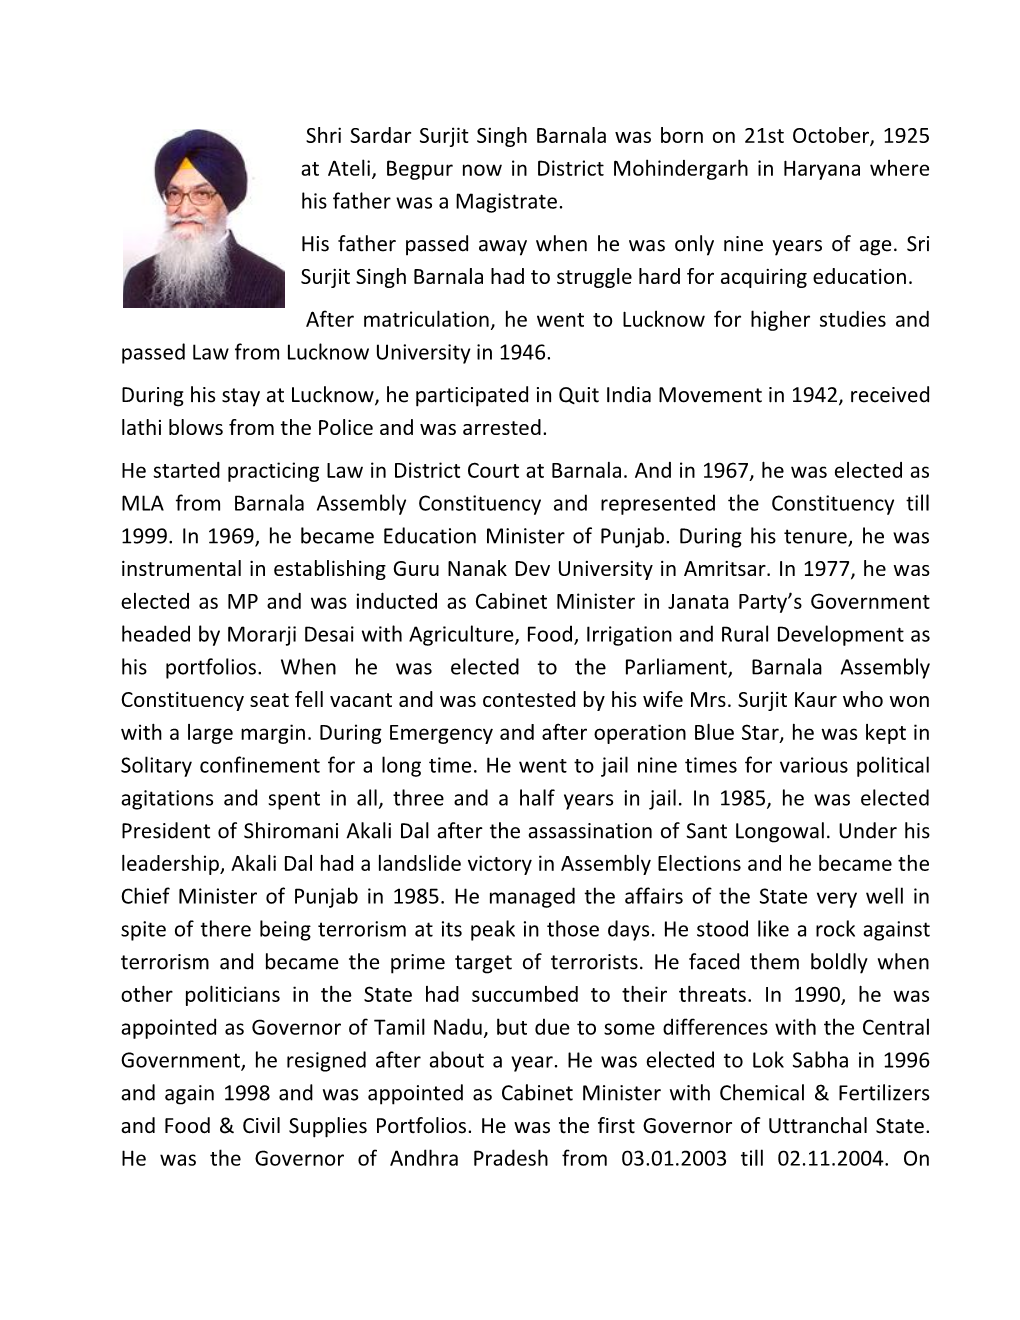 Shri Sardar Surjit Singh Barnala Was Born on 21St October, 1925 at Ateli, Begpur Now in District Mohindergarh in Haryana Where His Father Was a Magistrate